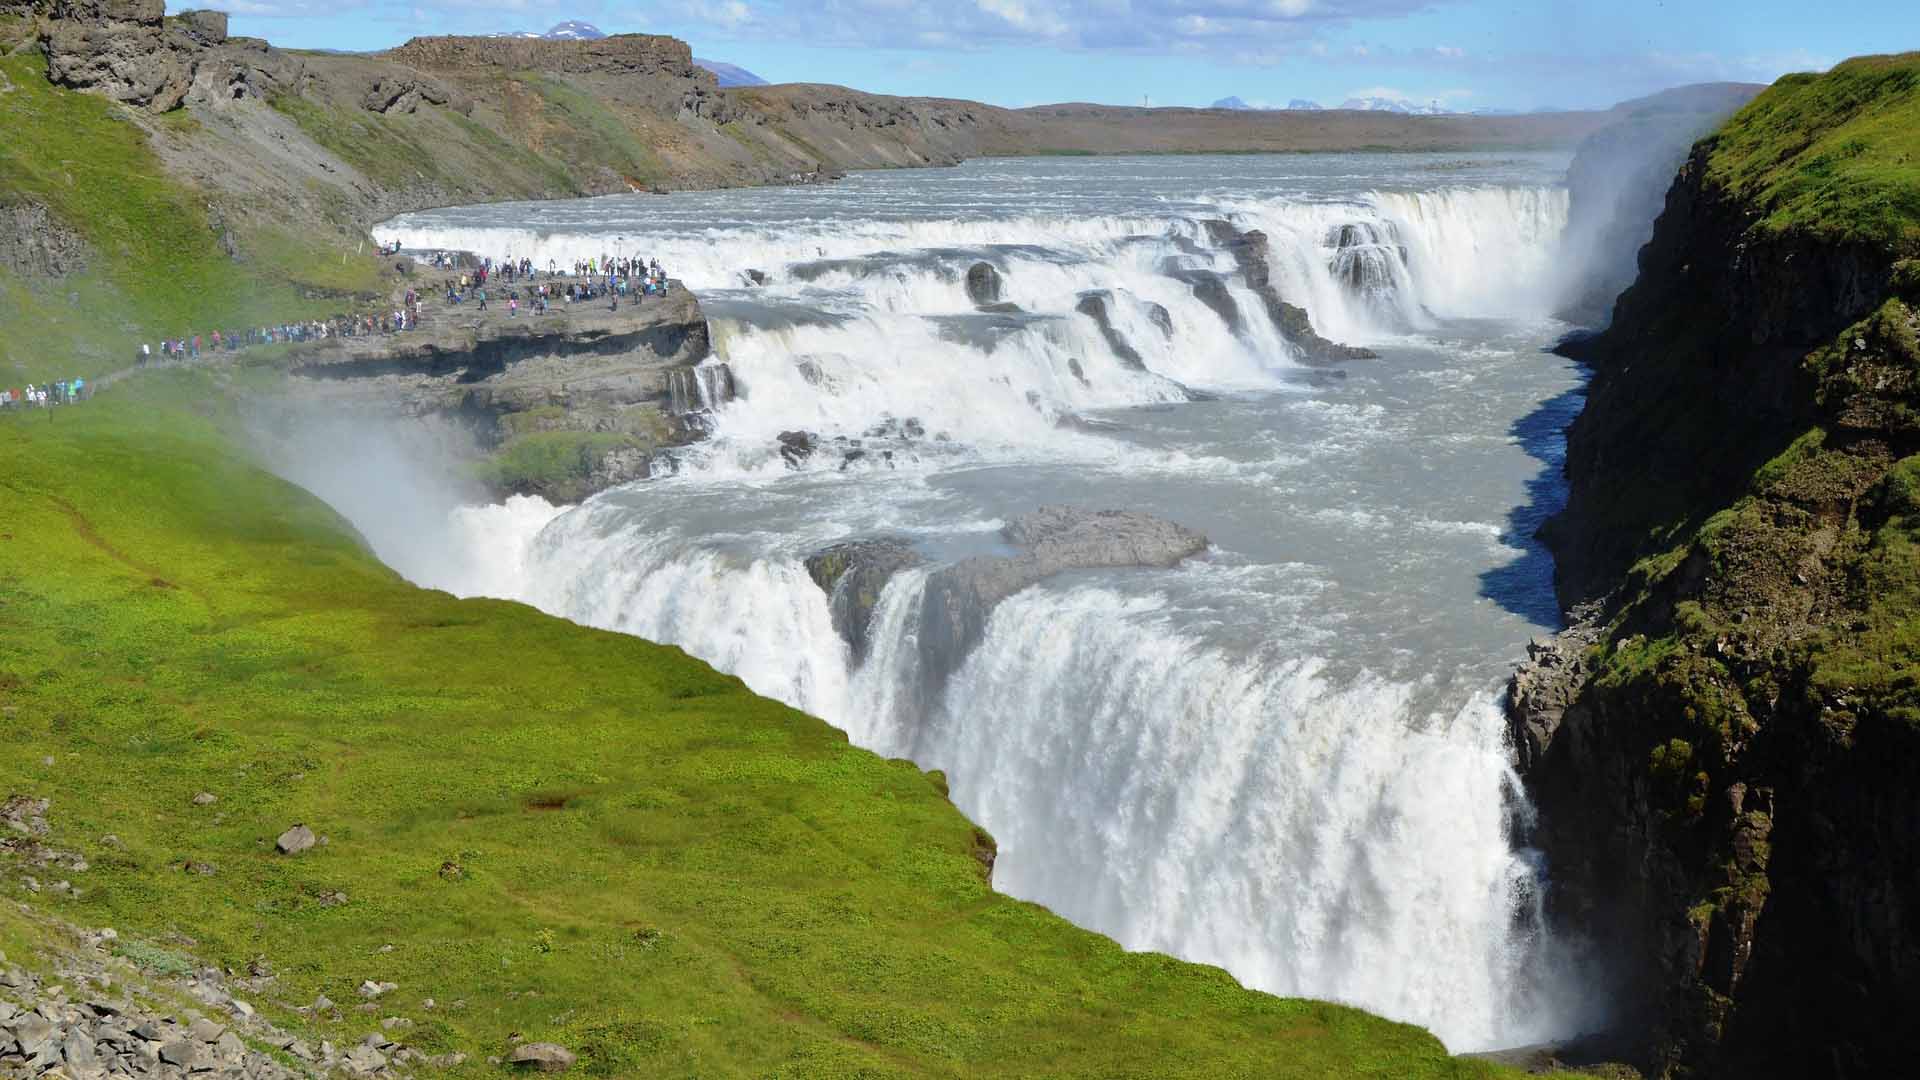 Gullfoss or Golden Waterfall in Iceland is a part of the Golden Circle, the best attractions in Iceland